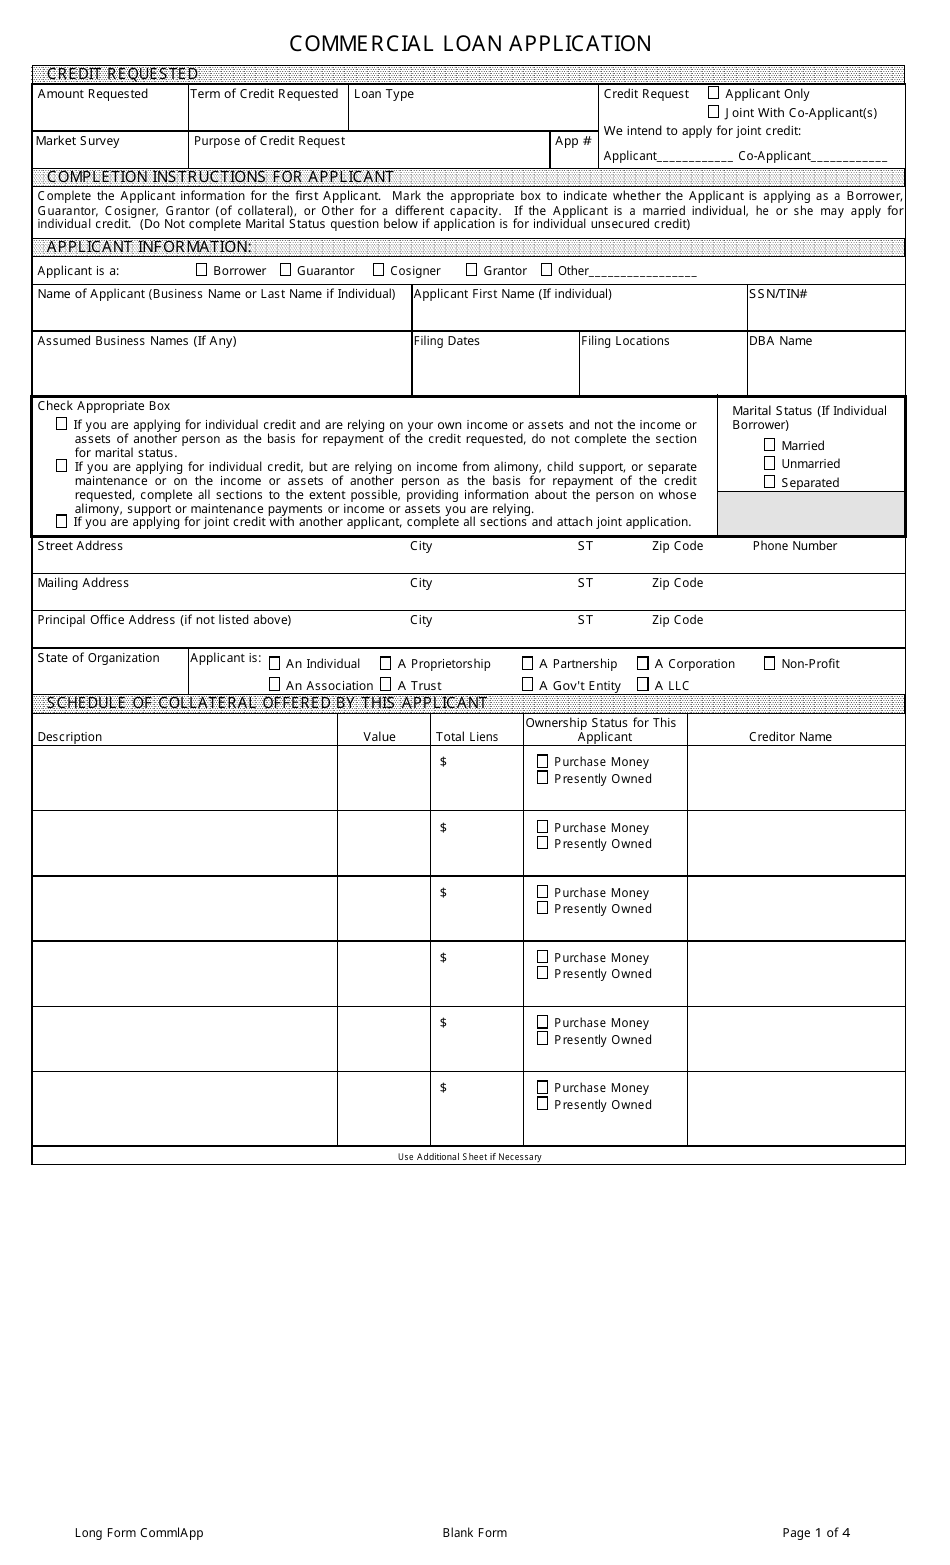 Commercial Loan Application Form Fill Out Sign Online and Download